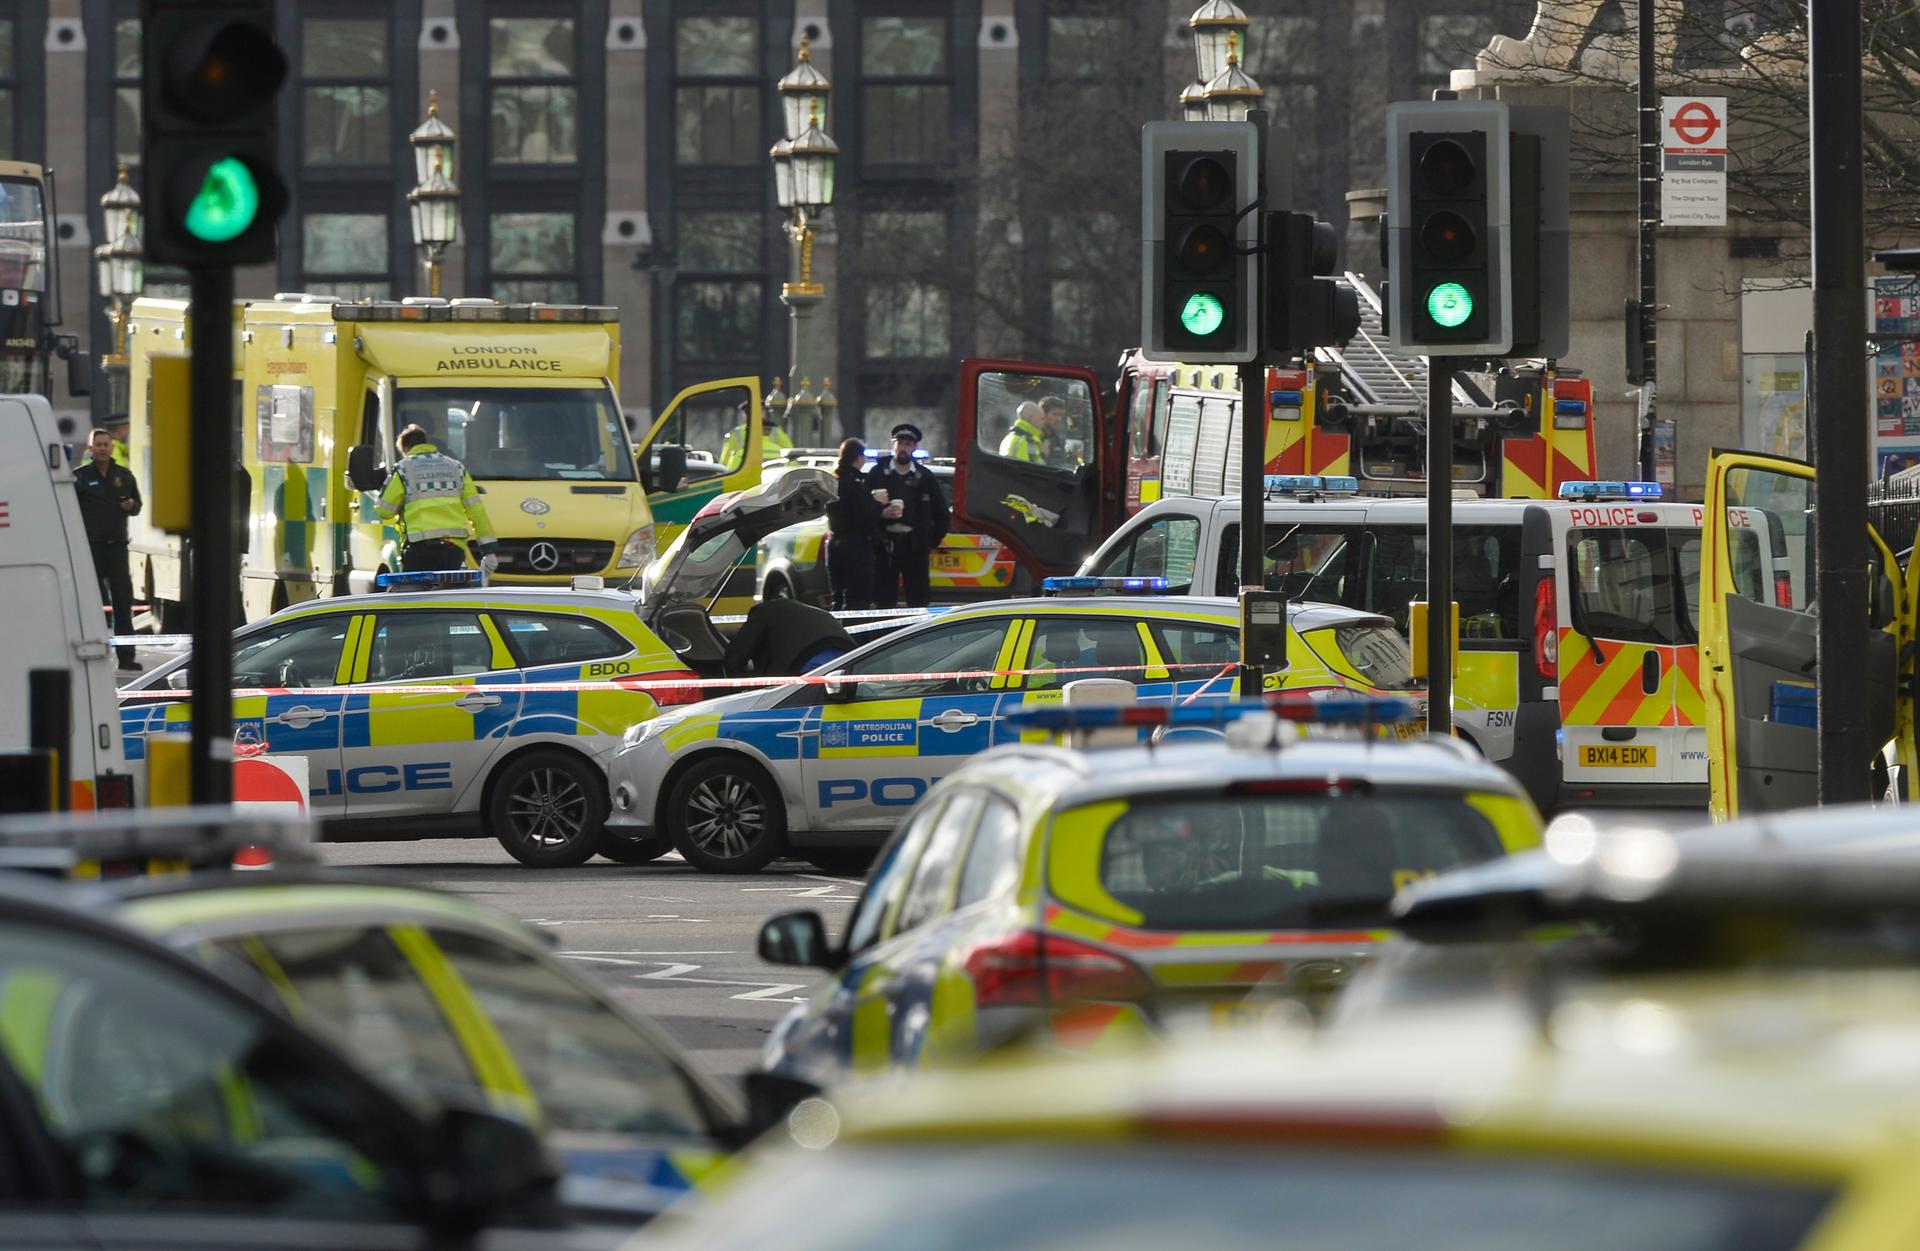 Emergency services respond after an incident on Westminster Bridge in London